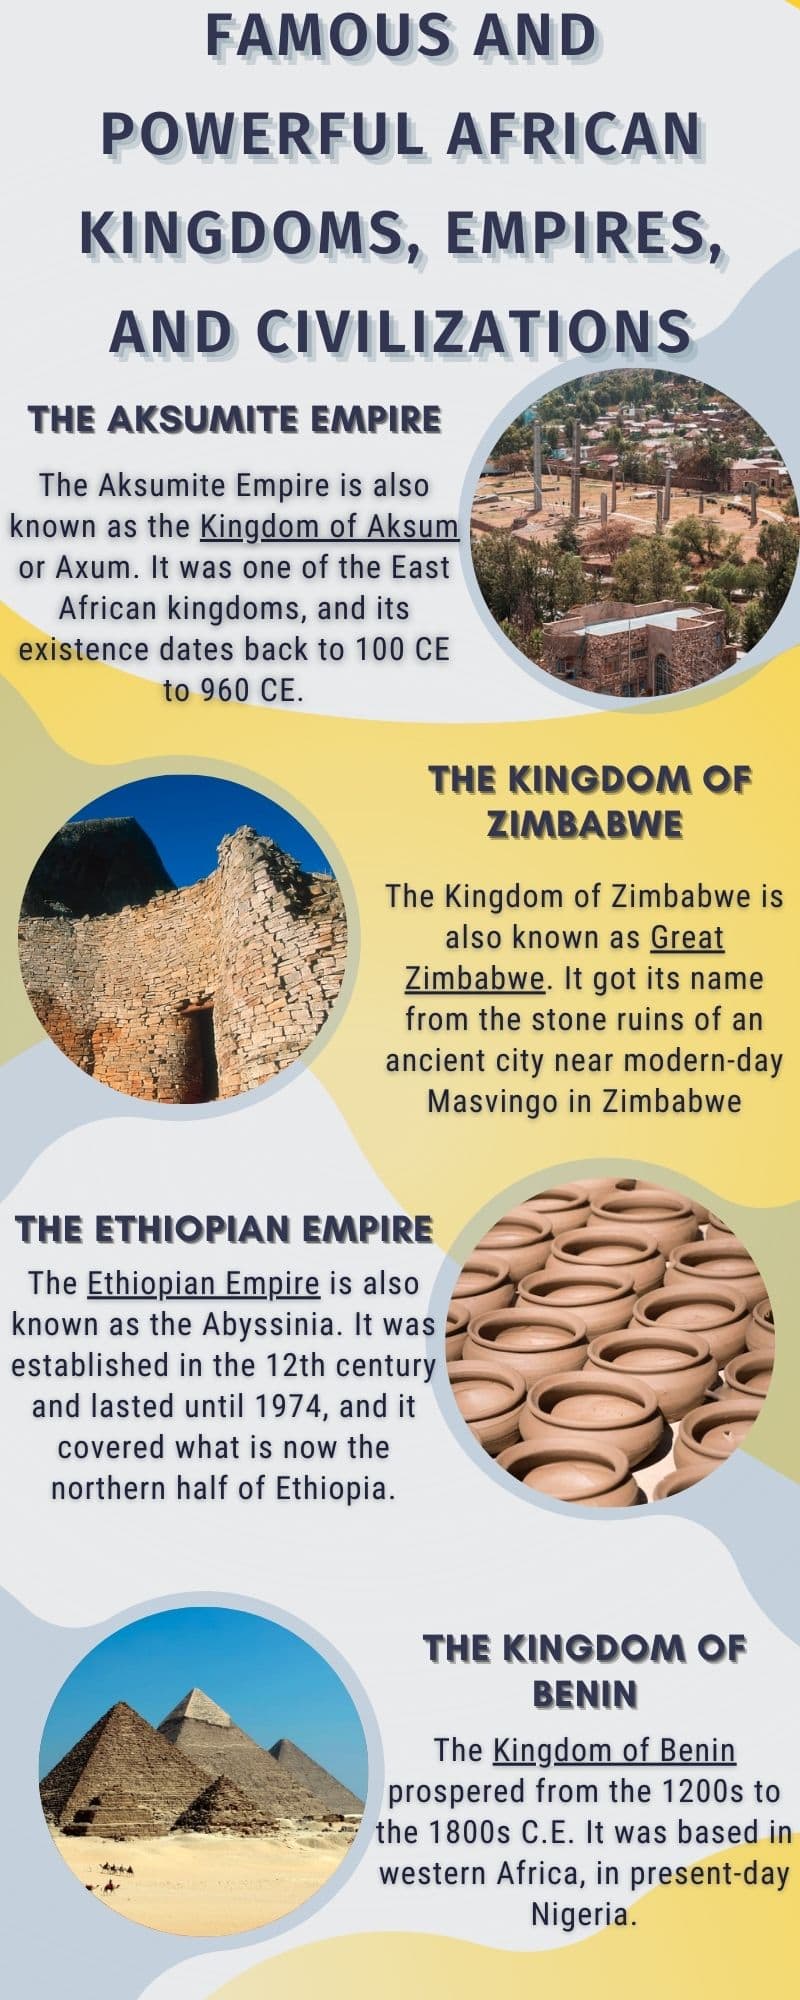 Famous and powerful African kingdoms